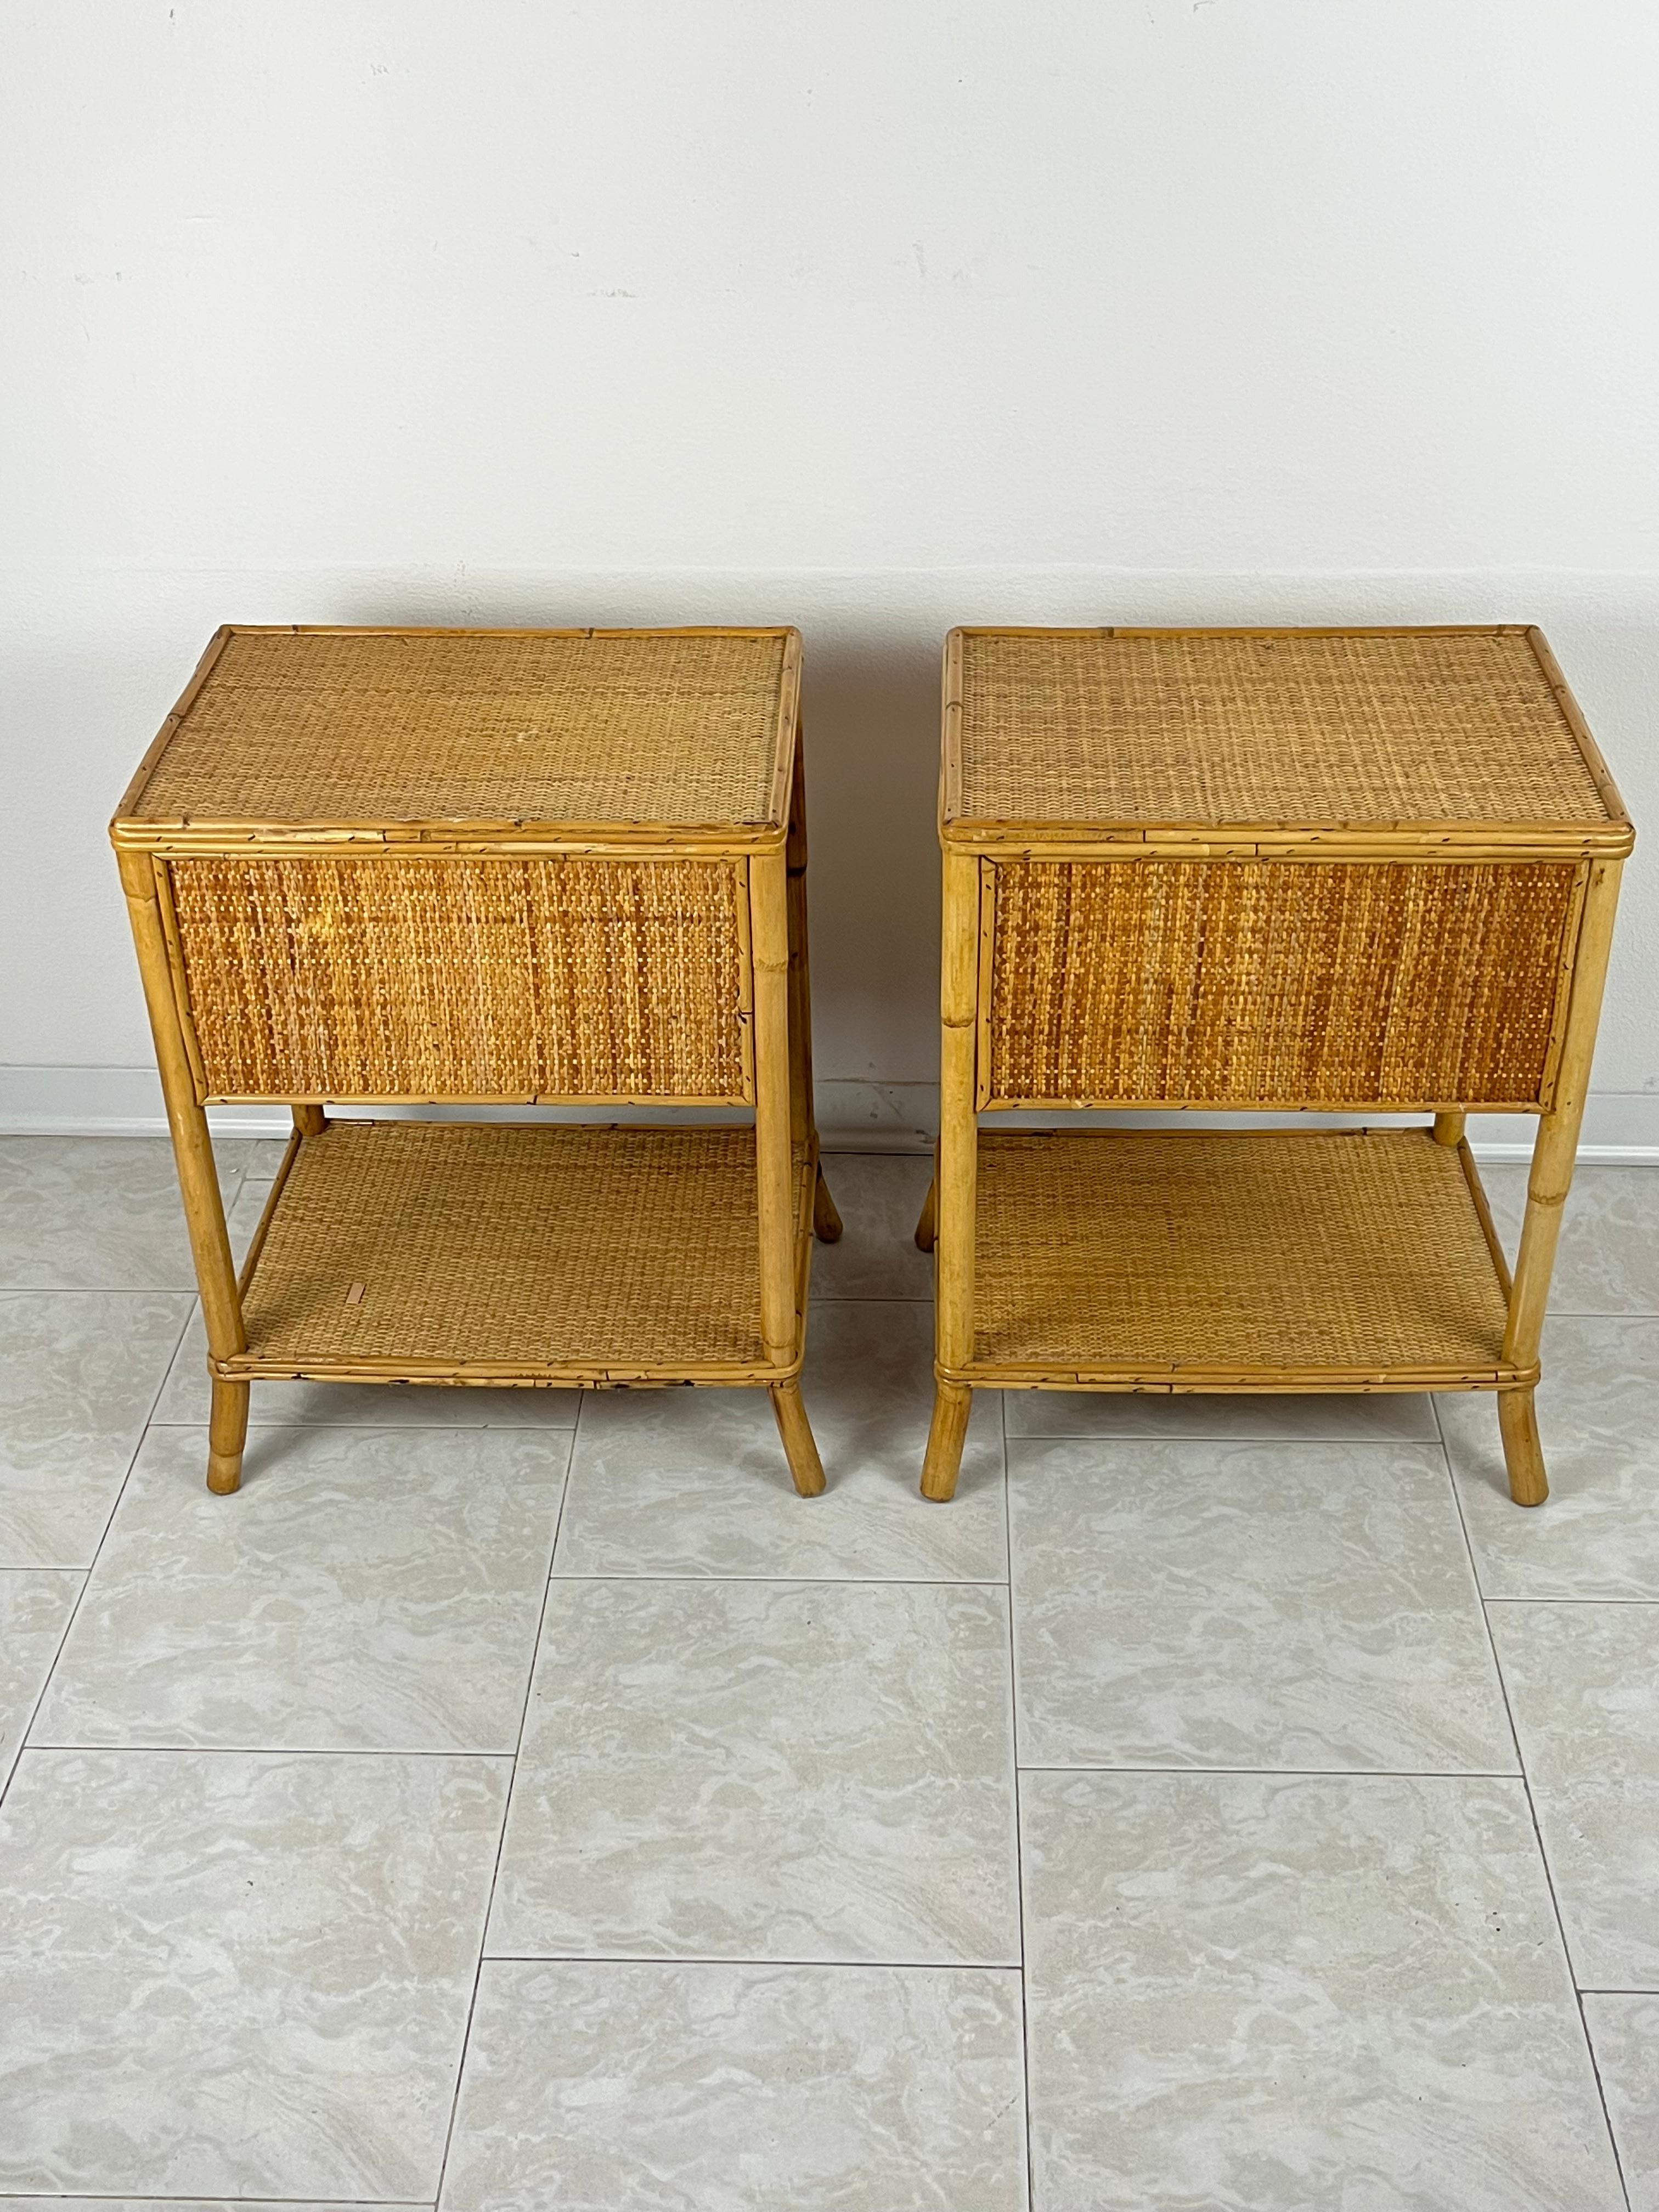 Late 20th Century Pair of Vintage Italian Bamboo and Rattan Bedside Tables 1970s For Sale